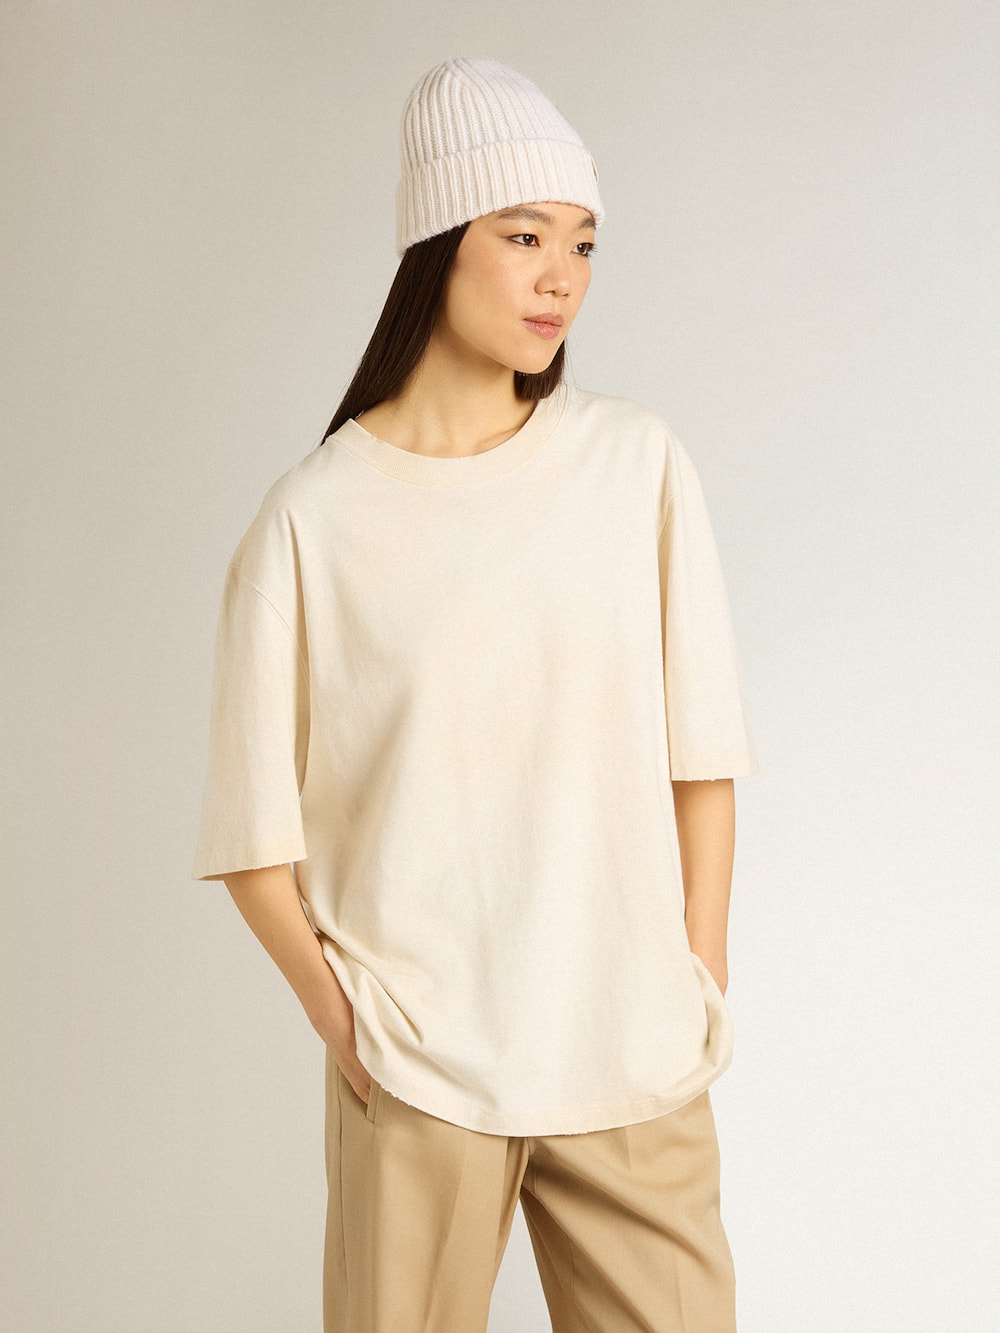 Golden Goose - T-Shirt CNY in Lived-in-White in 